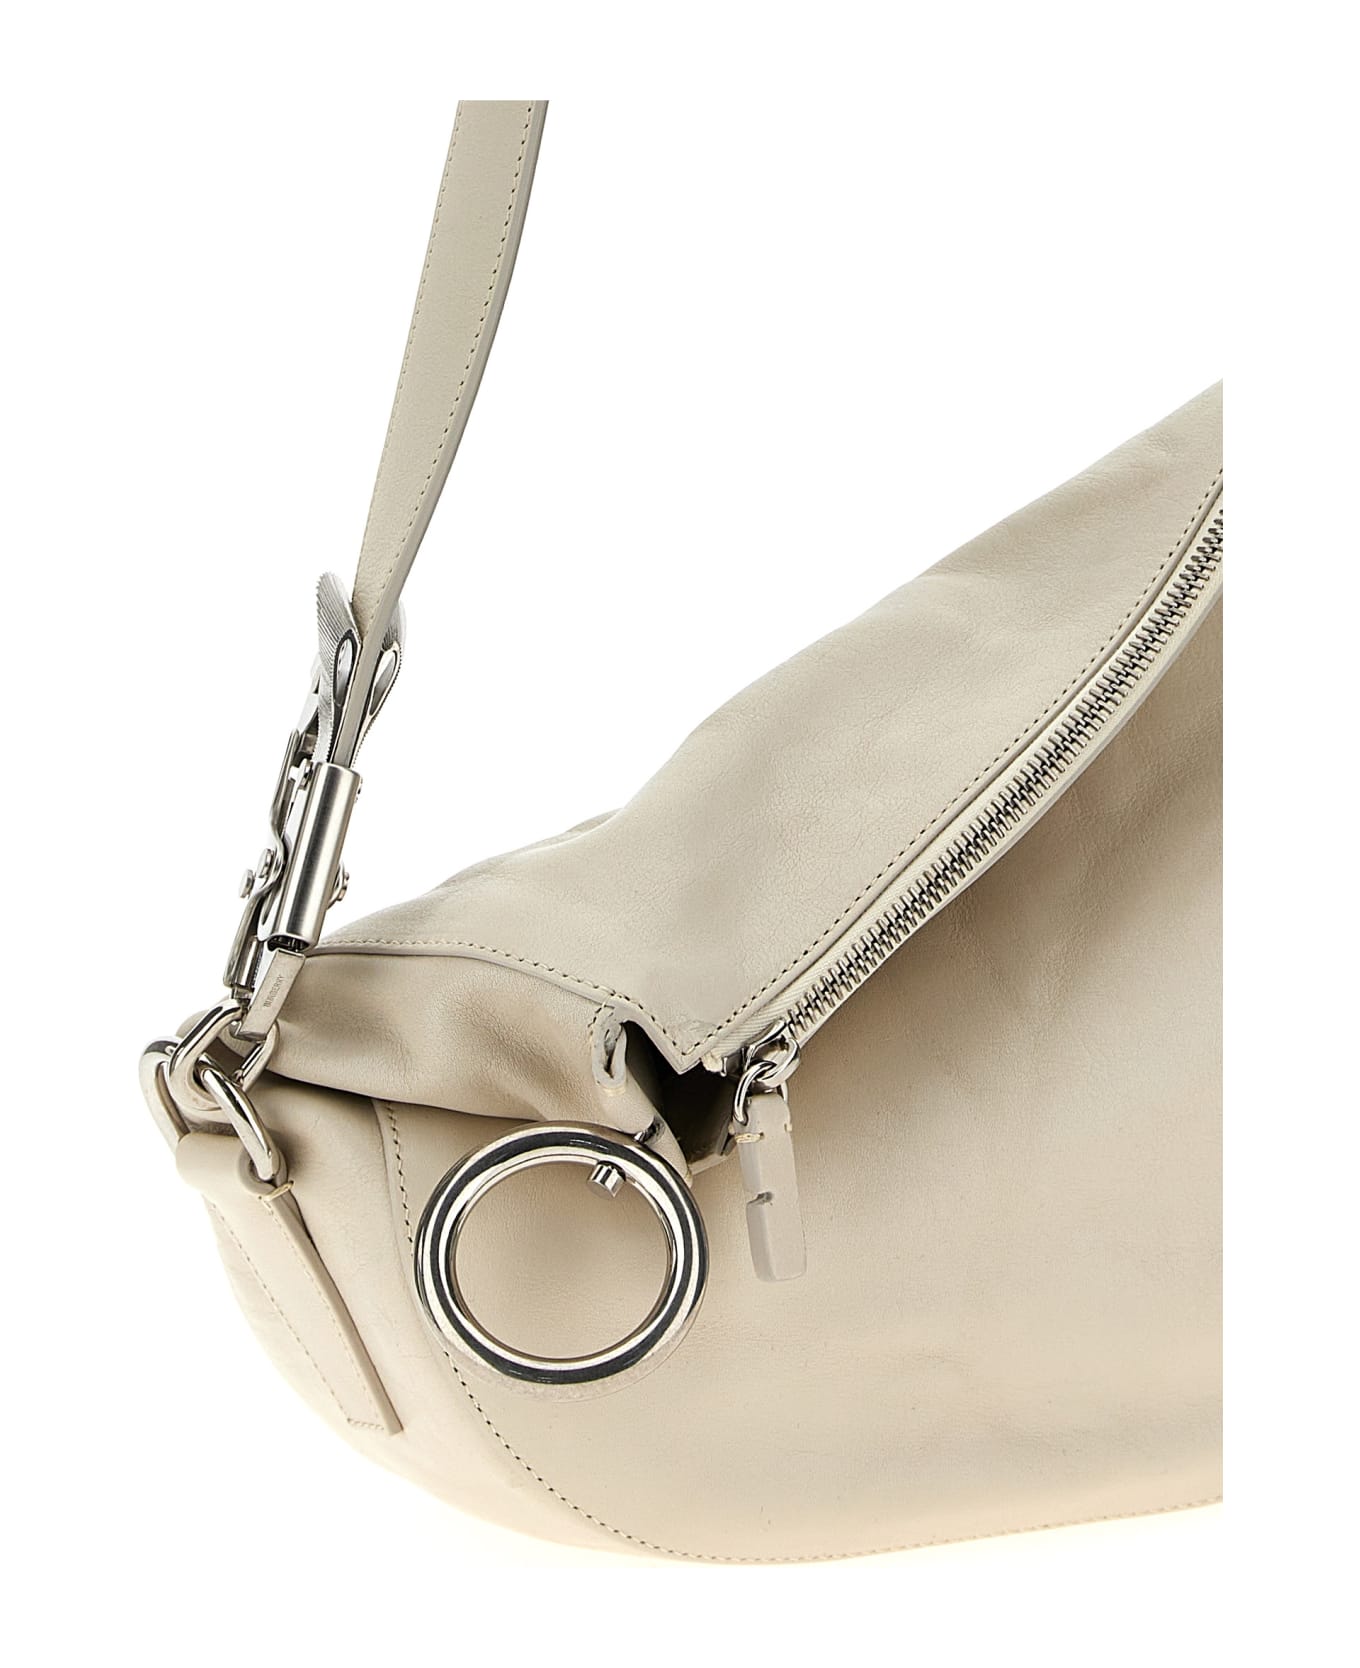 Burberry 'knight' Small Shoulder Bag - Beige トートバッグ